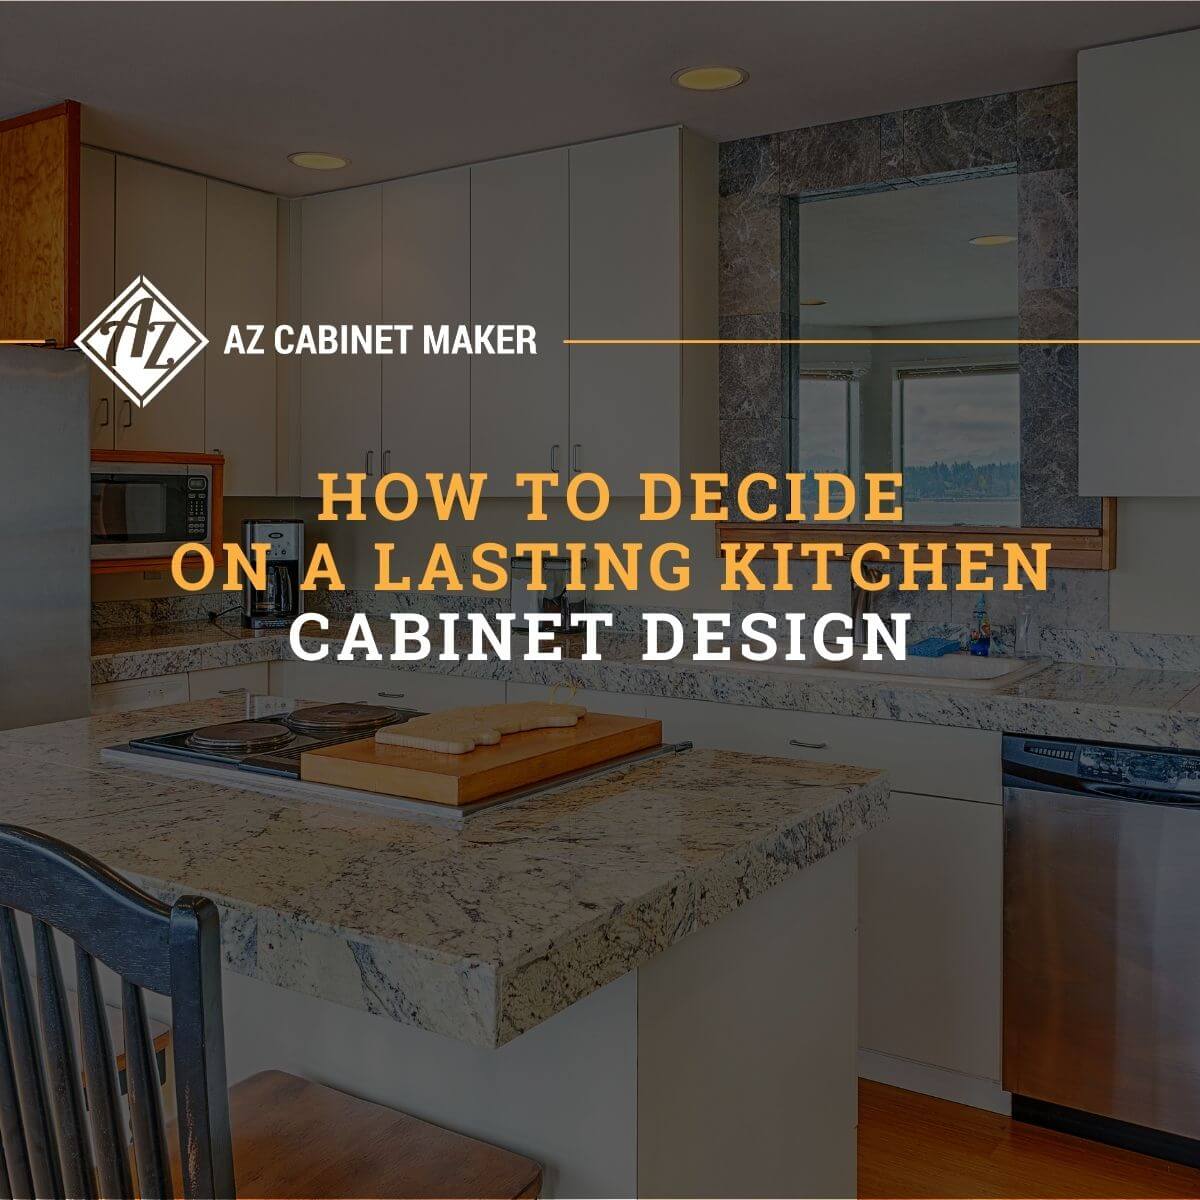 How to Decide on a Lasting Kitchen Cabinet Design